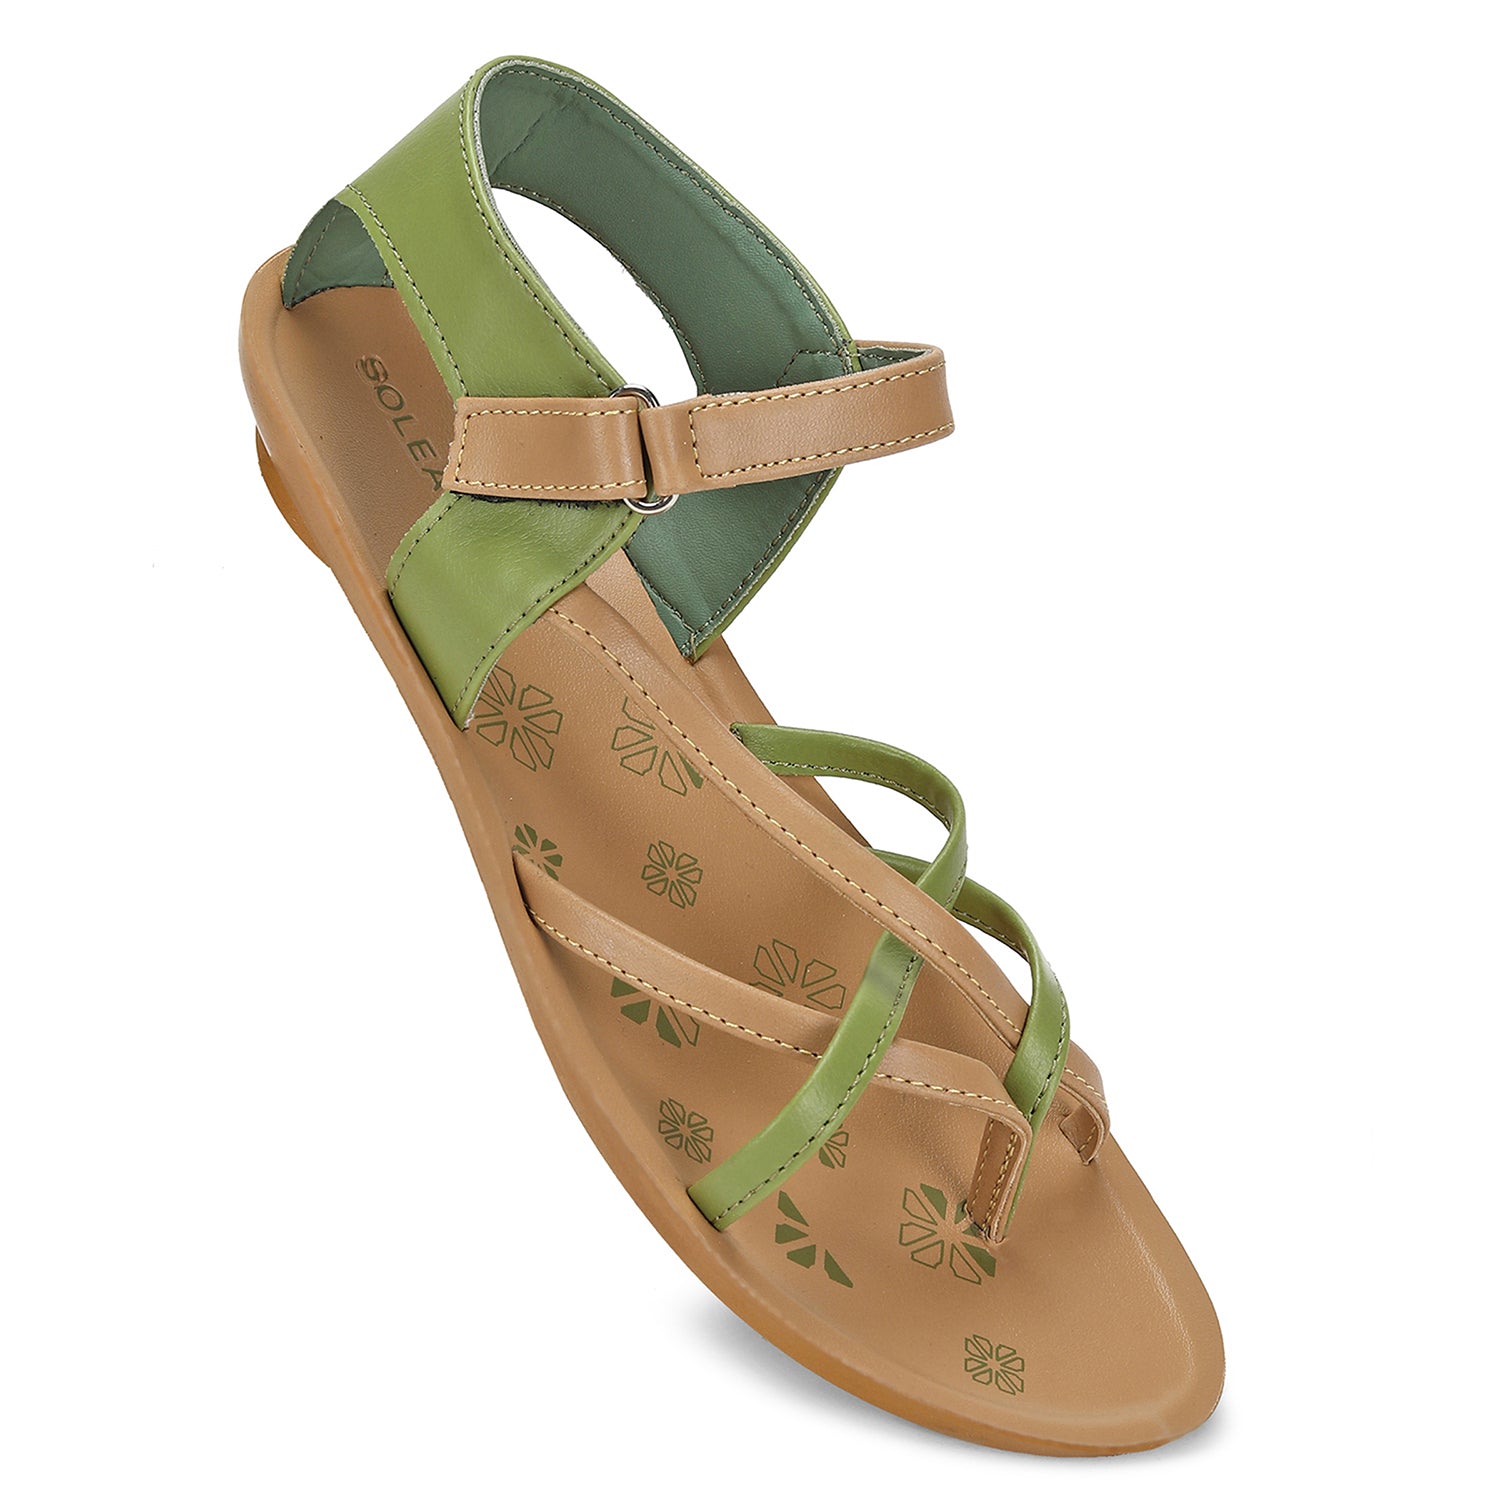 Paragon PUK7017L Women Sandals | Casual &amp; Formal Sandals | Stylish, Comfortable &amp; Durable | For Daily &amp; Occasion Wear